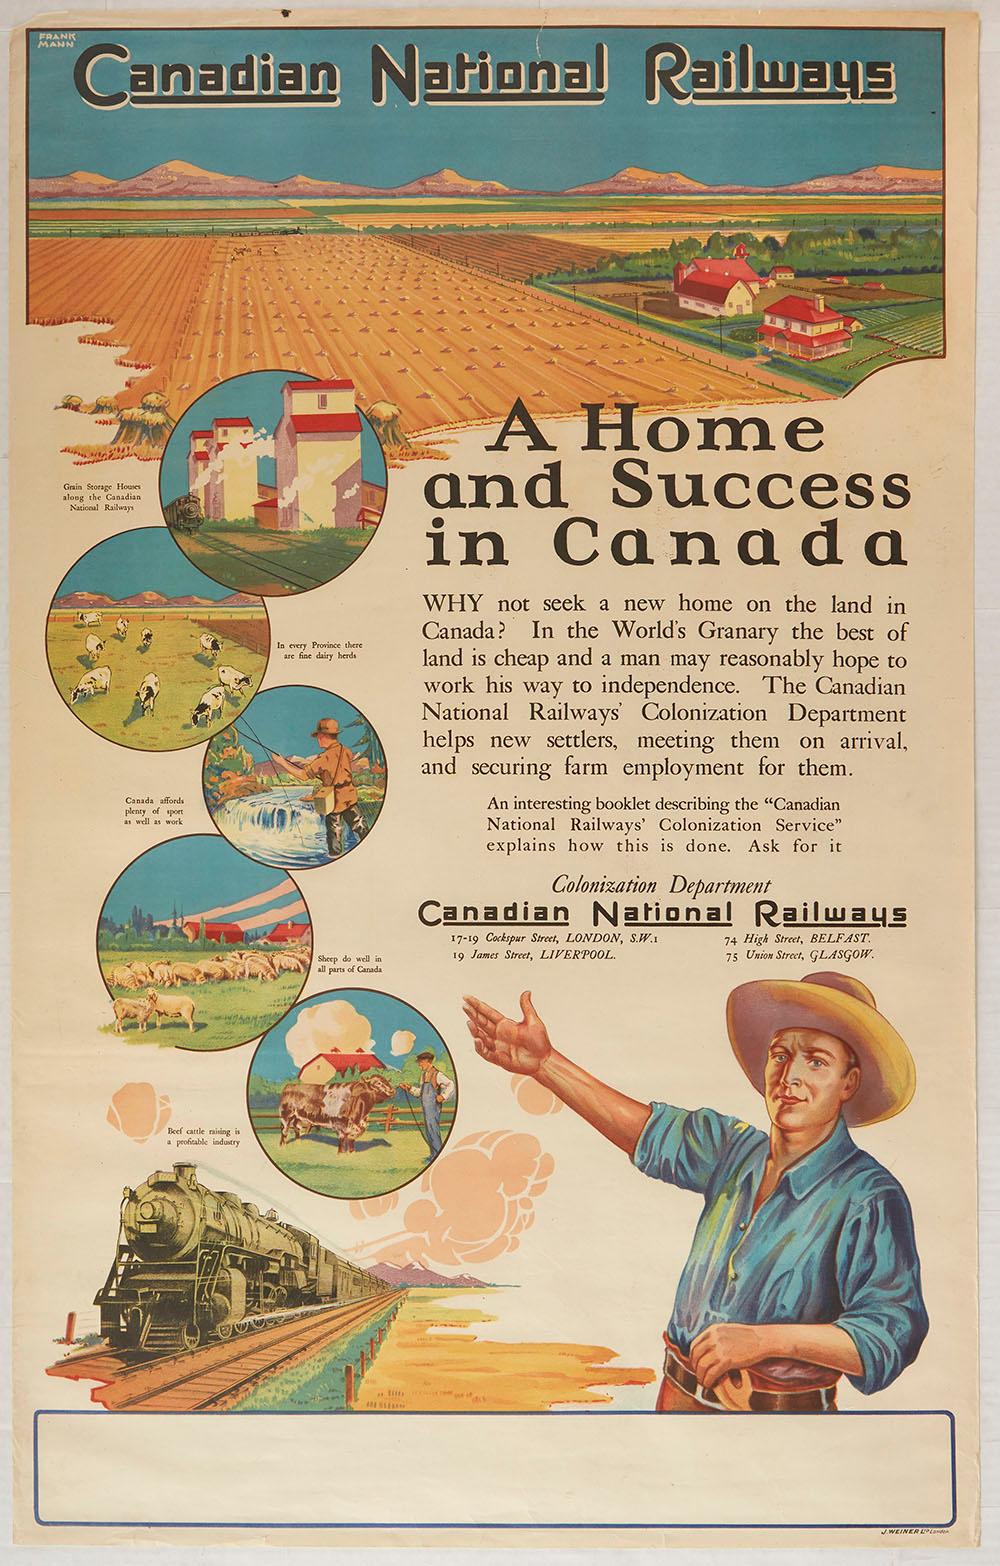 Frank Mann Print - Original Vintage Poster Canadian National Railways A Home And Success In Canada